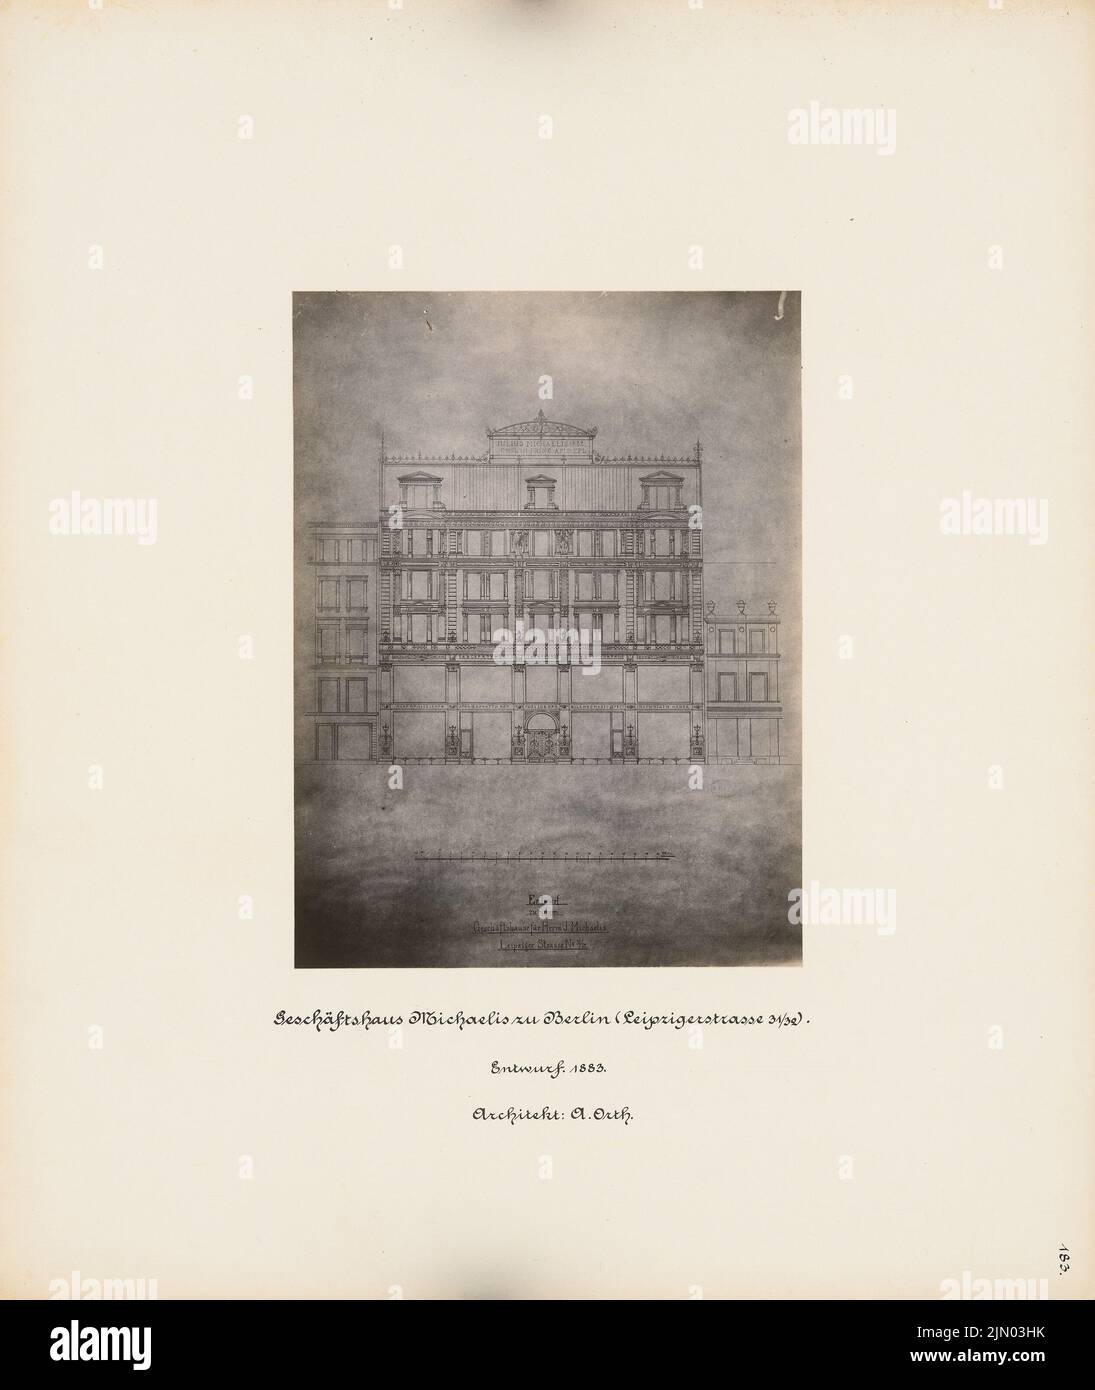 Orth August (1828-1901), Michaelis commercial building in Berlin (1883): front view. Photo on cardboard, 39.3 x 33.1 cm (including scan edges) Orth August  (1828-1901): Geschäftshaus Michaelis, Berlin Stock Photo